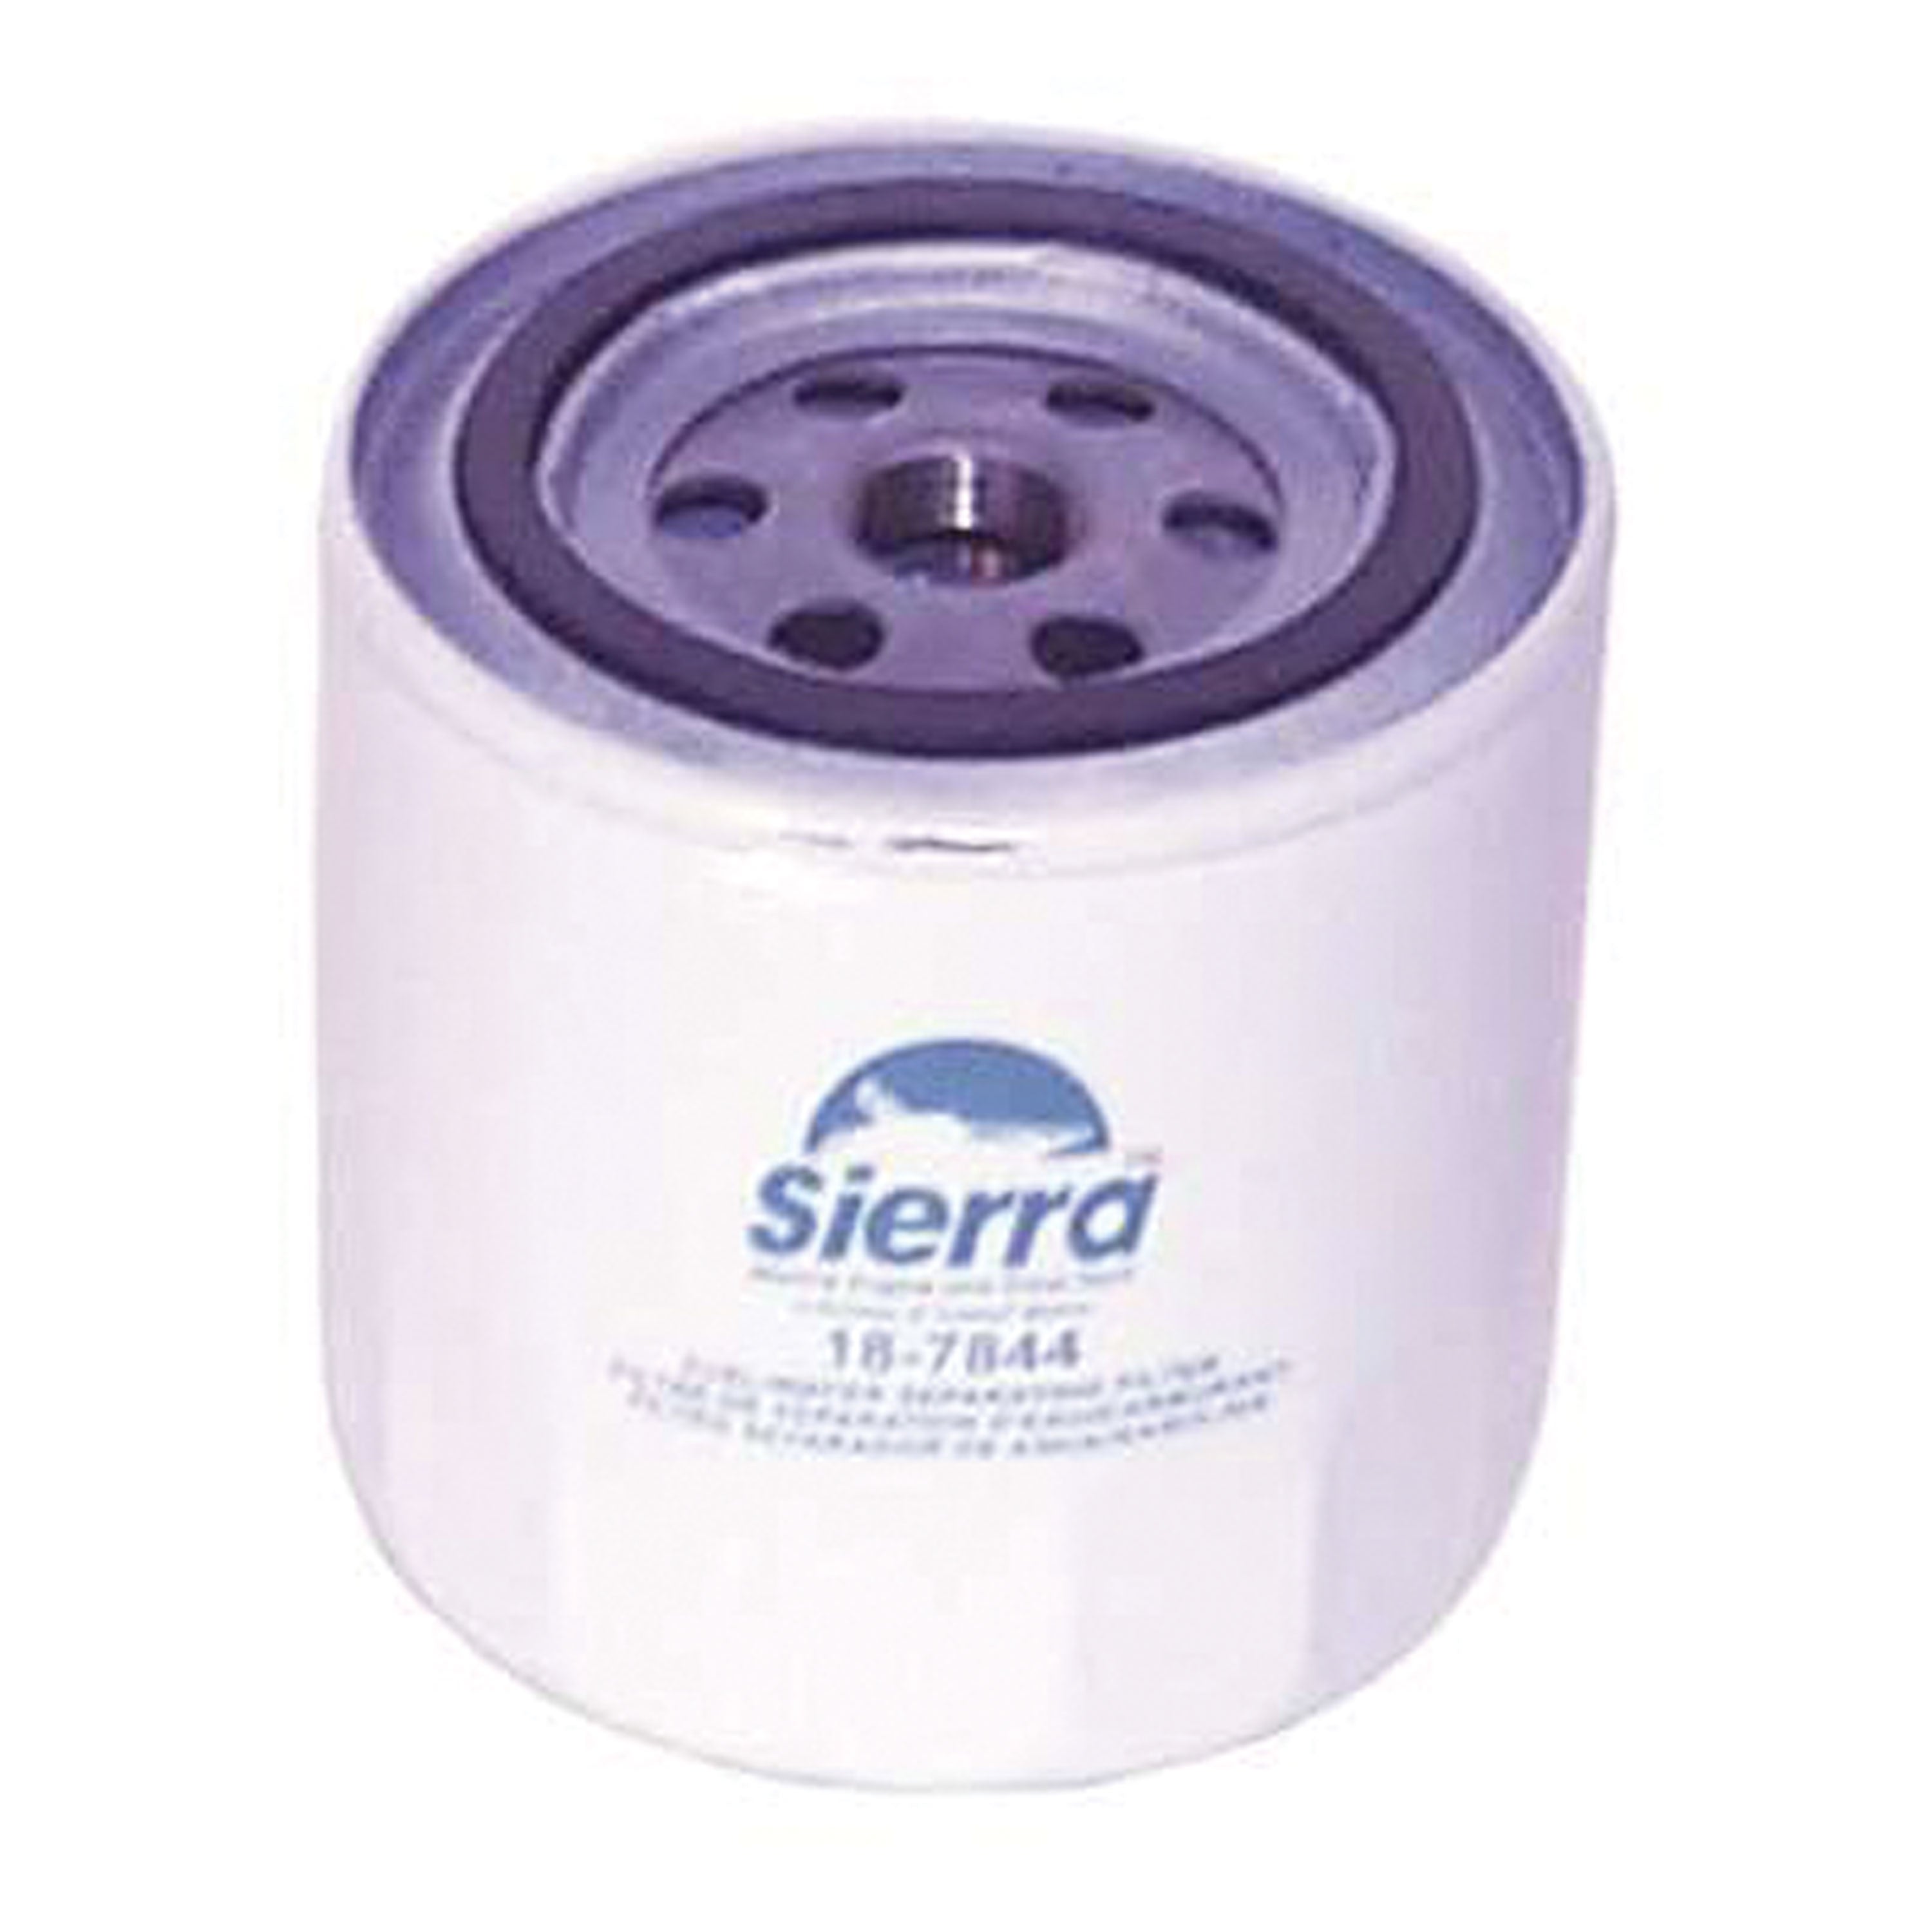 Sierra 18-7844 21 Micron Replacement Fuel Filter - Short, 3.875 in.